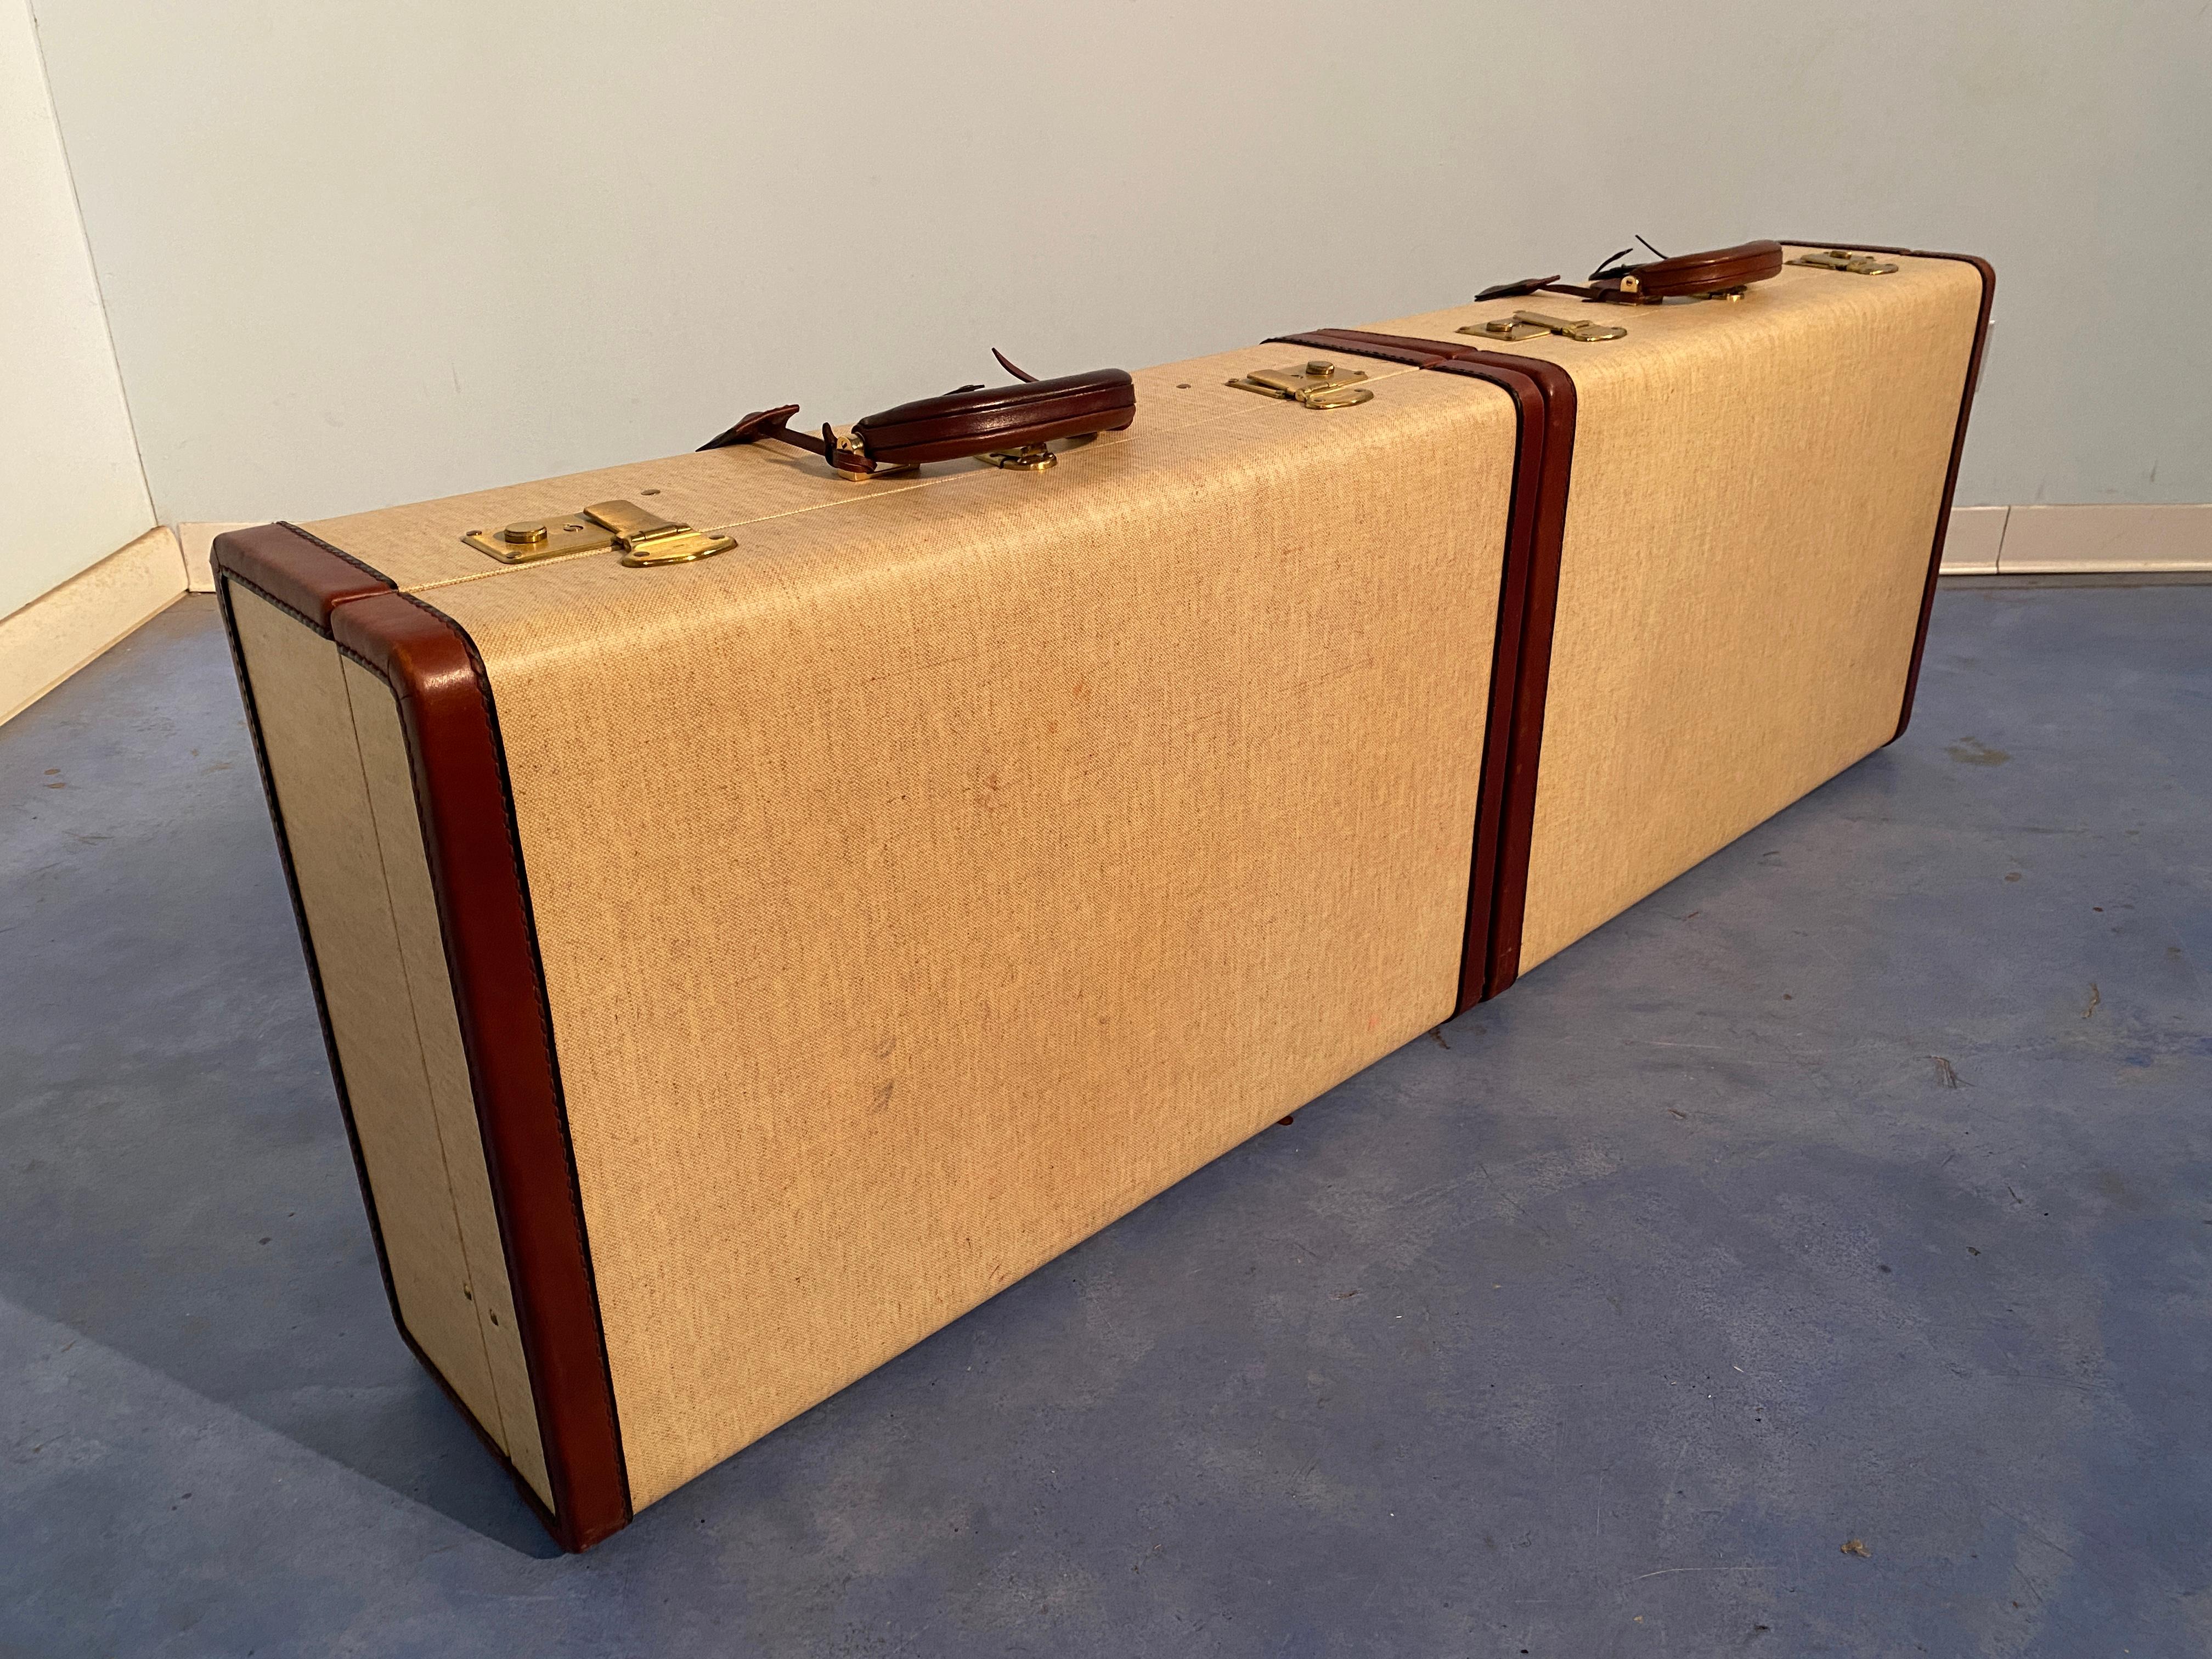 Italian Mid-Century Moder Luggages or Suitcases Mèlange Color, Set of Two, 1960 For Sale 7